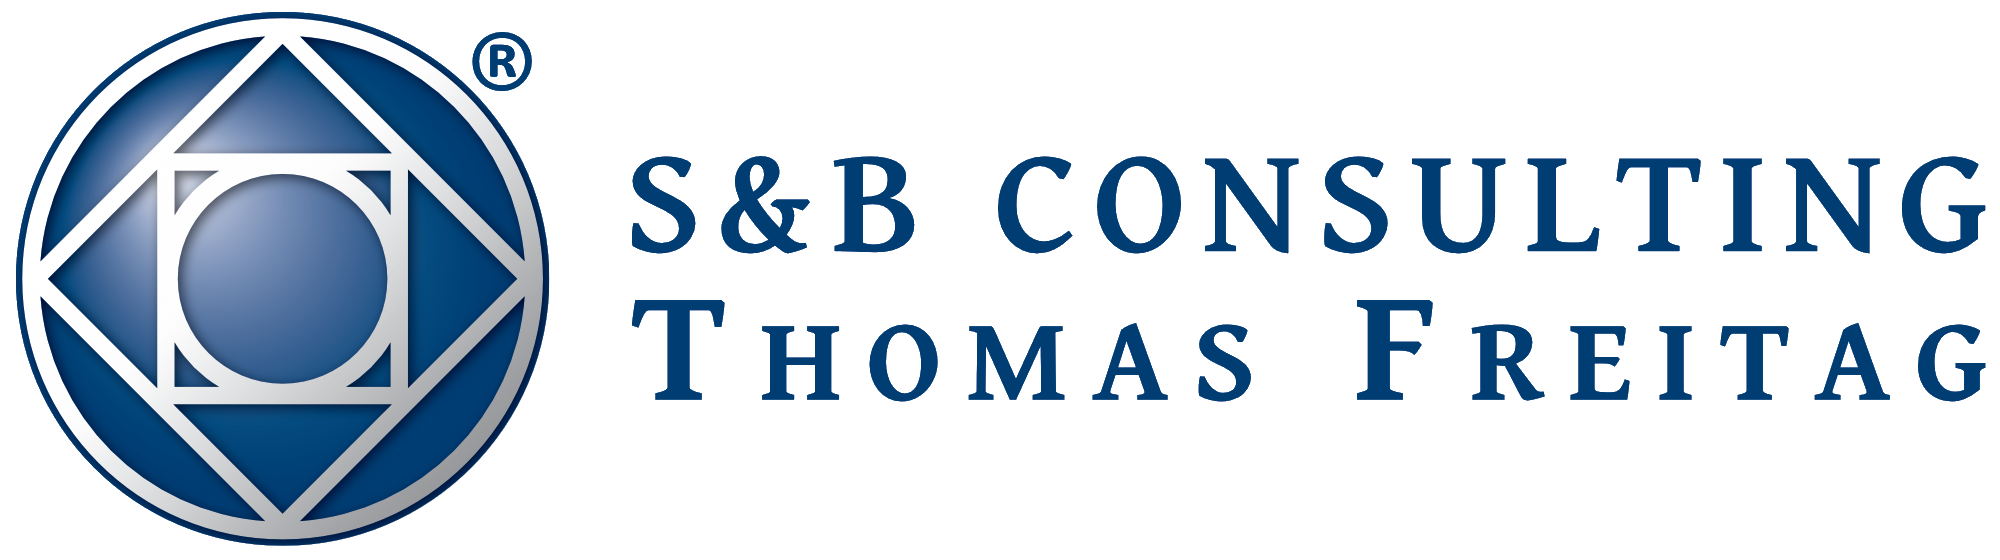 S&B Consulting logo